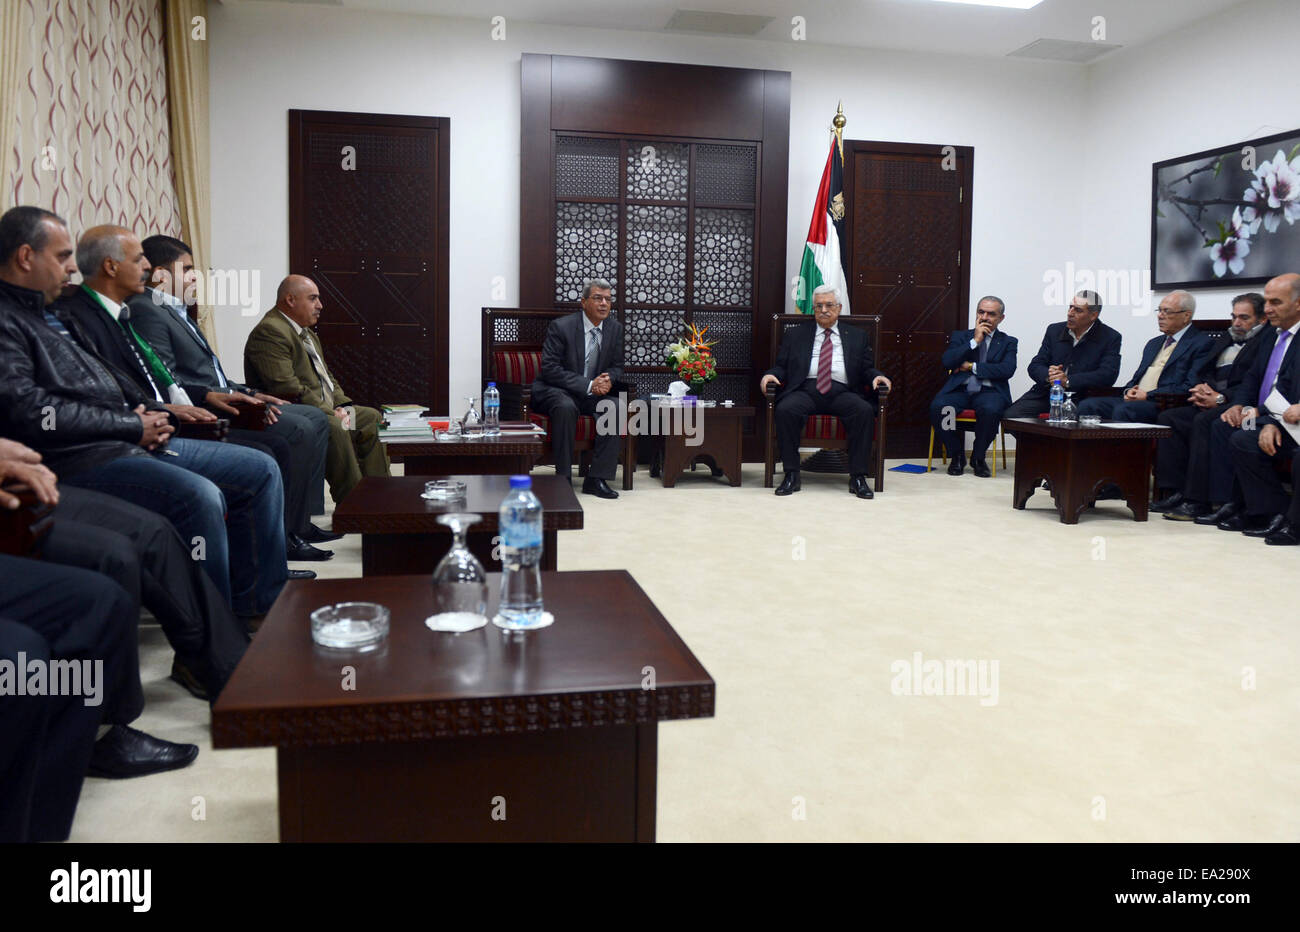 Ramallah, West Bank, Palestinian Territory. 5th Nov, 2014. Palestinian President Mahmoud Abbas meets with freed prisoners from Israeli jails, at Abbas's headquarter in the West Bank city of Ramallah, November 5, 2014 © Thaer Ganaim/APA Images/ZUMA Wire/Alamy Live News Stock Photo